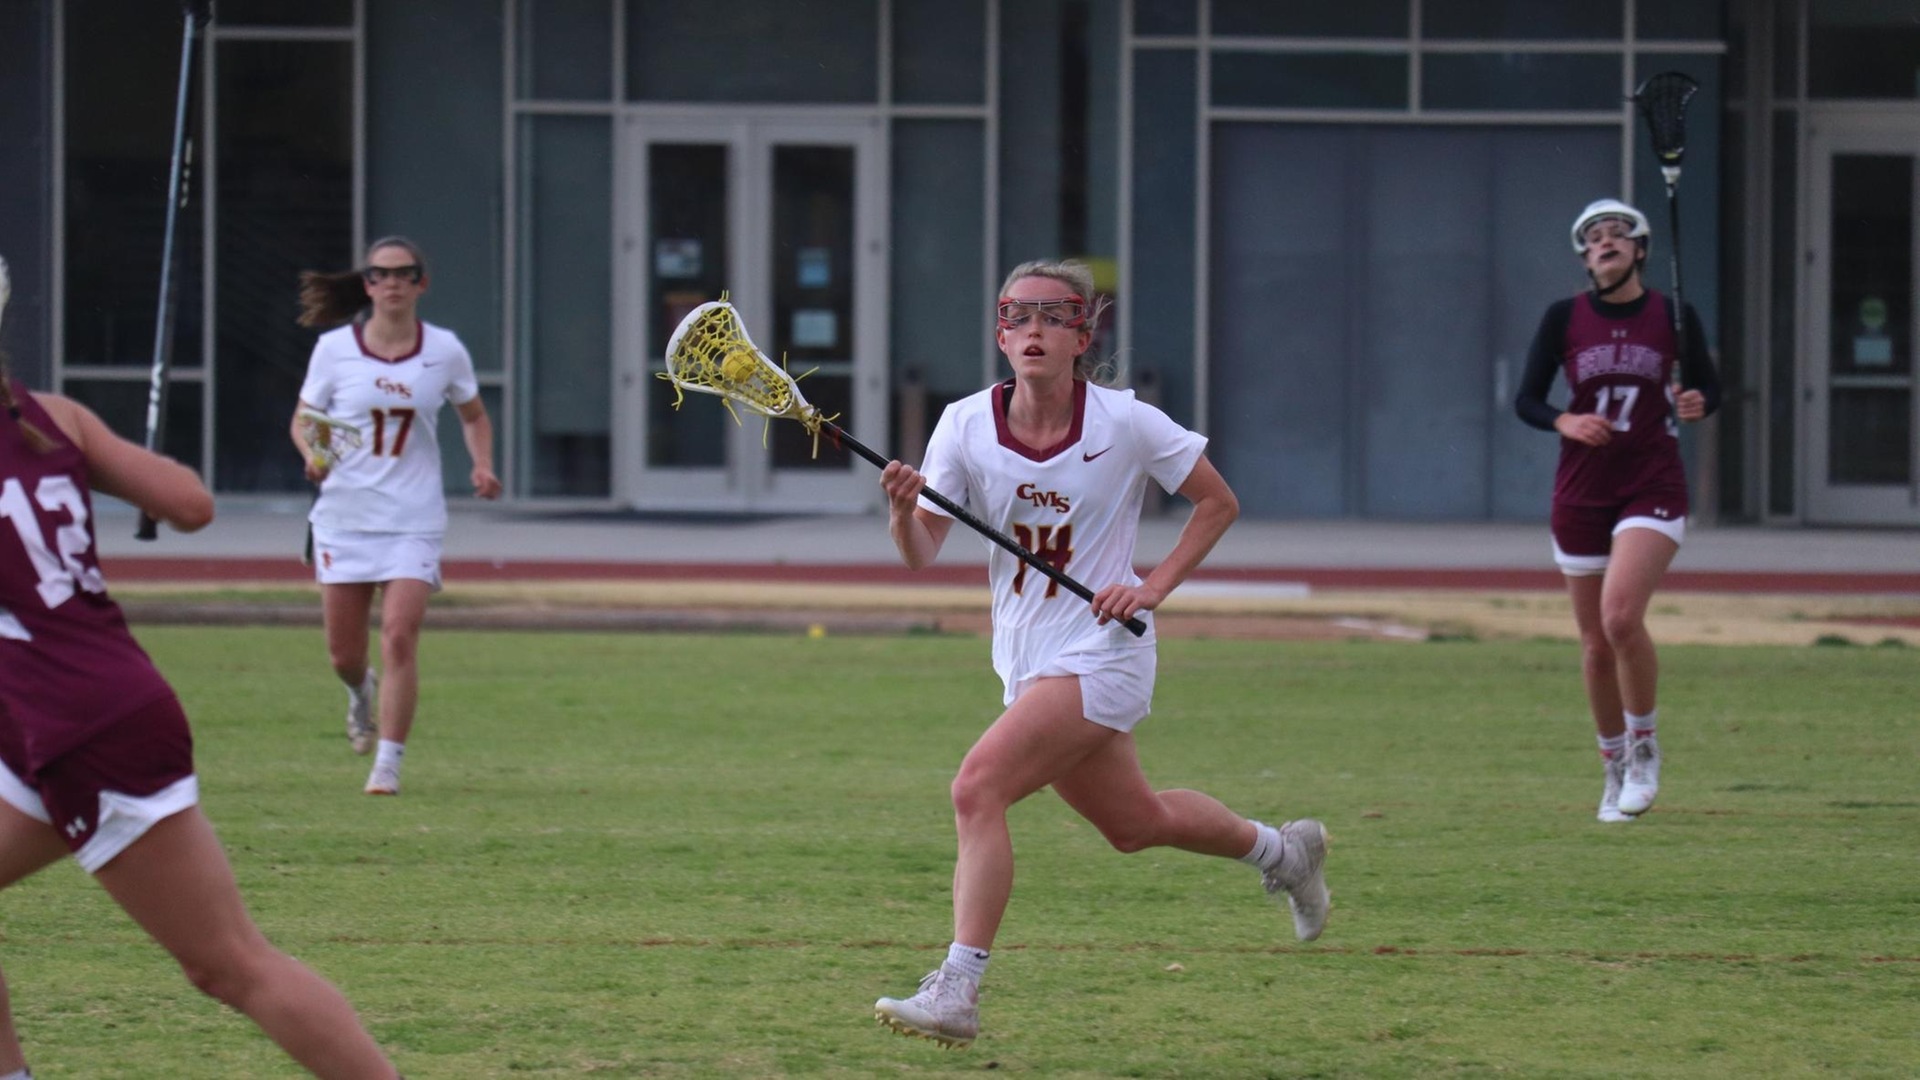 Olivia Carey had three goals and four assists (photo by Caelyn Smith)